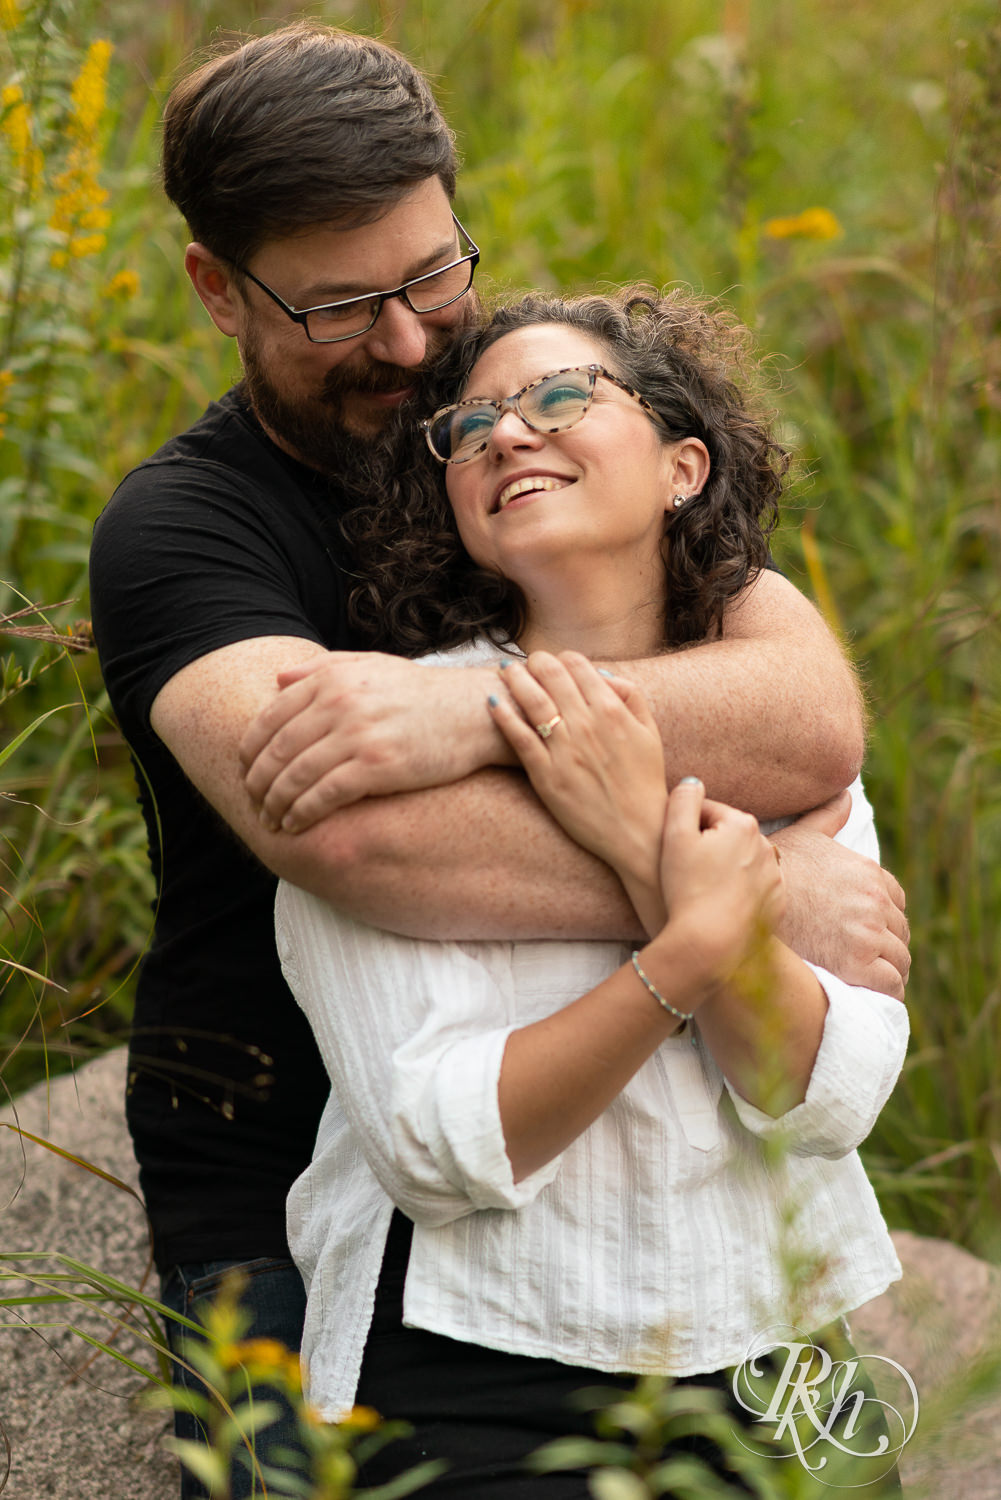 Man and woman in glasses holding each other at sunset engagement session.